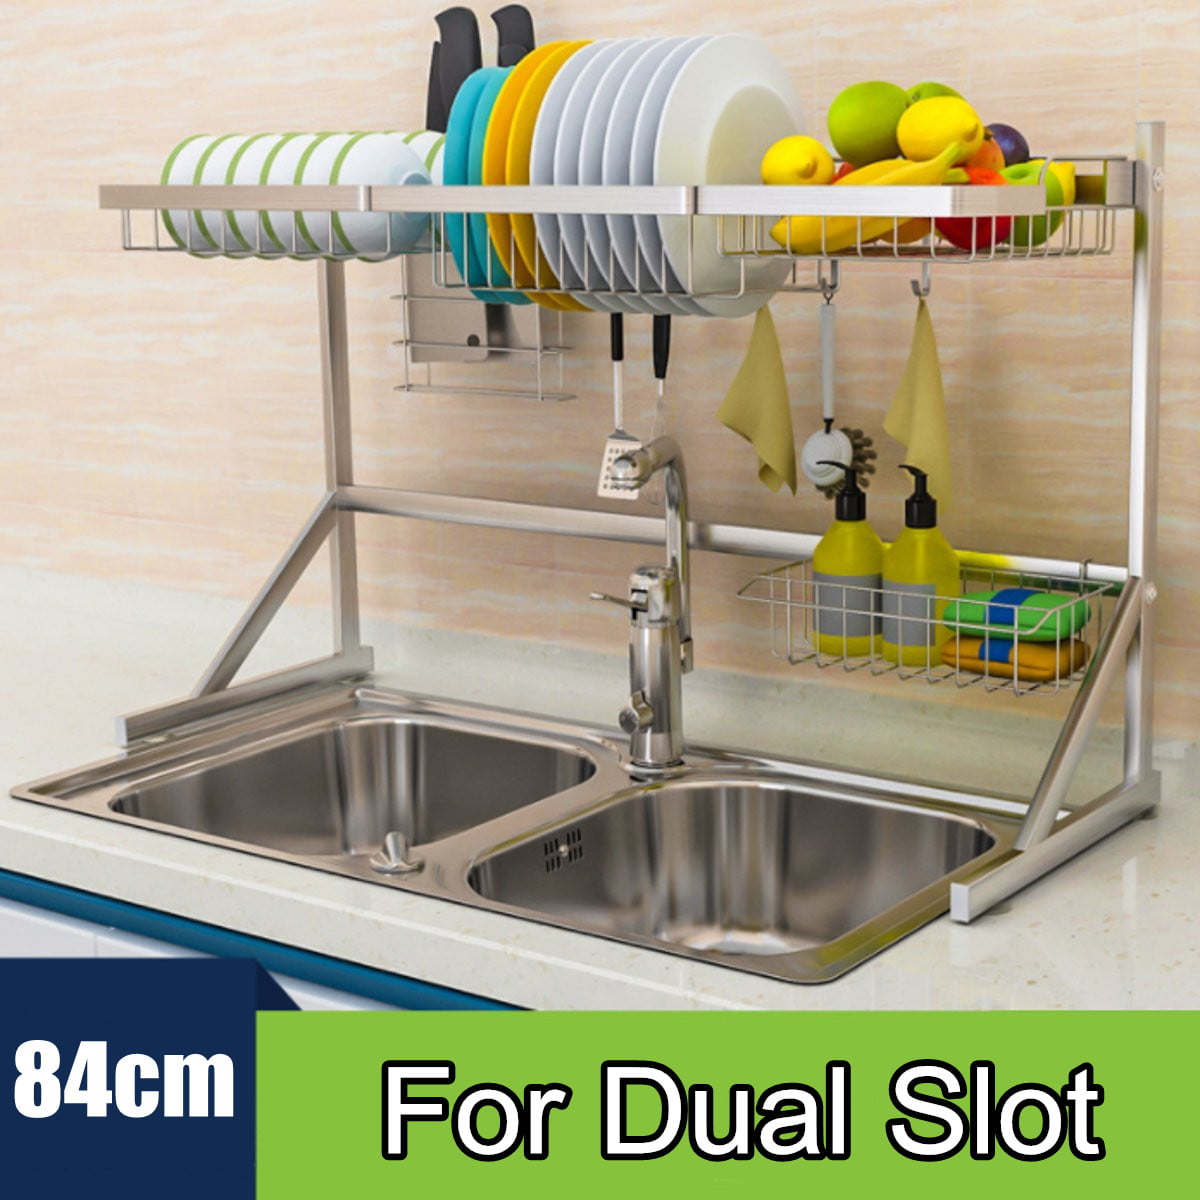 64/84CM Over Sink Dish Drying Rack Stainless Steel Kitchen Cutlery Shelf Holder 